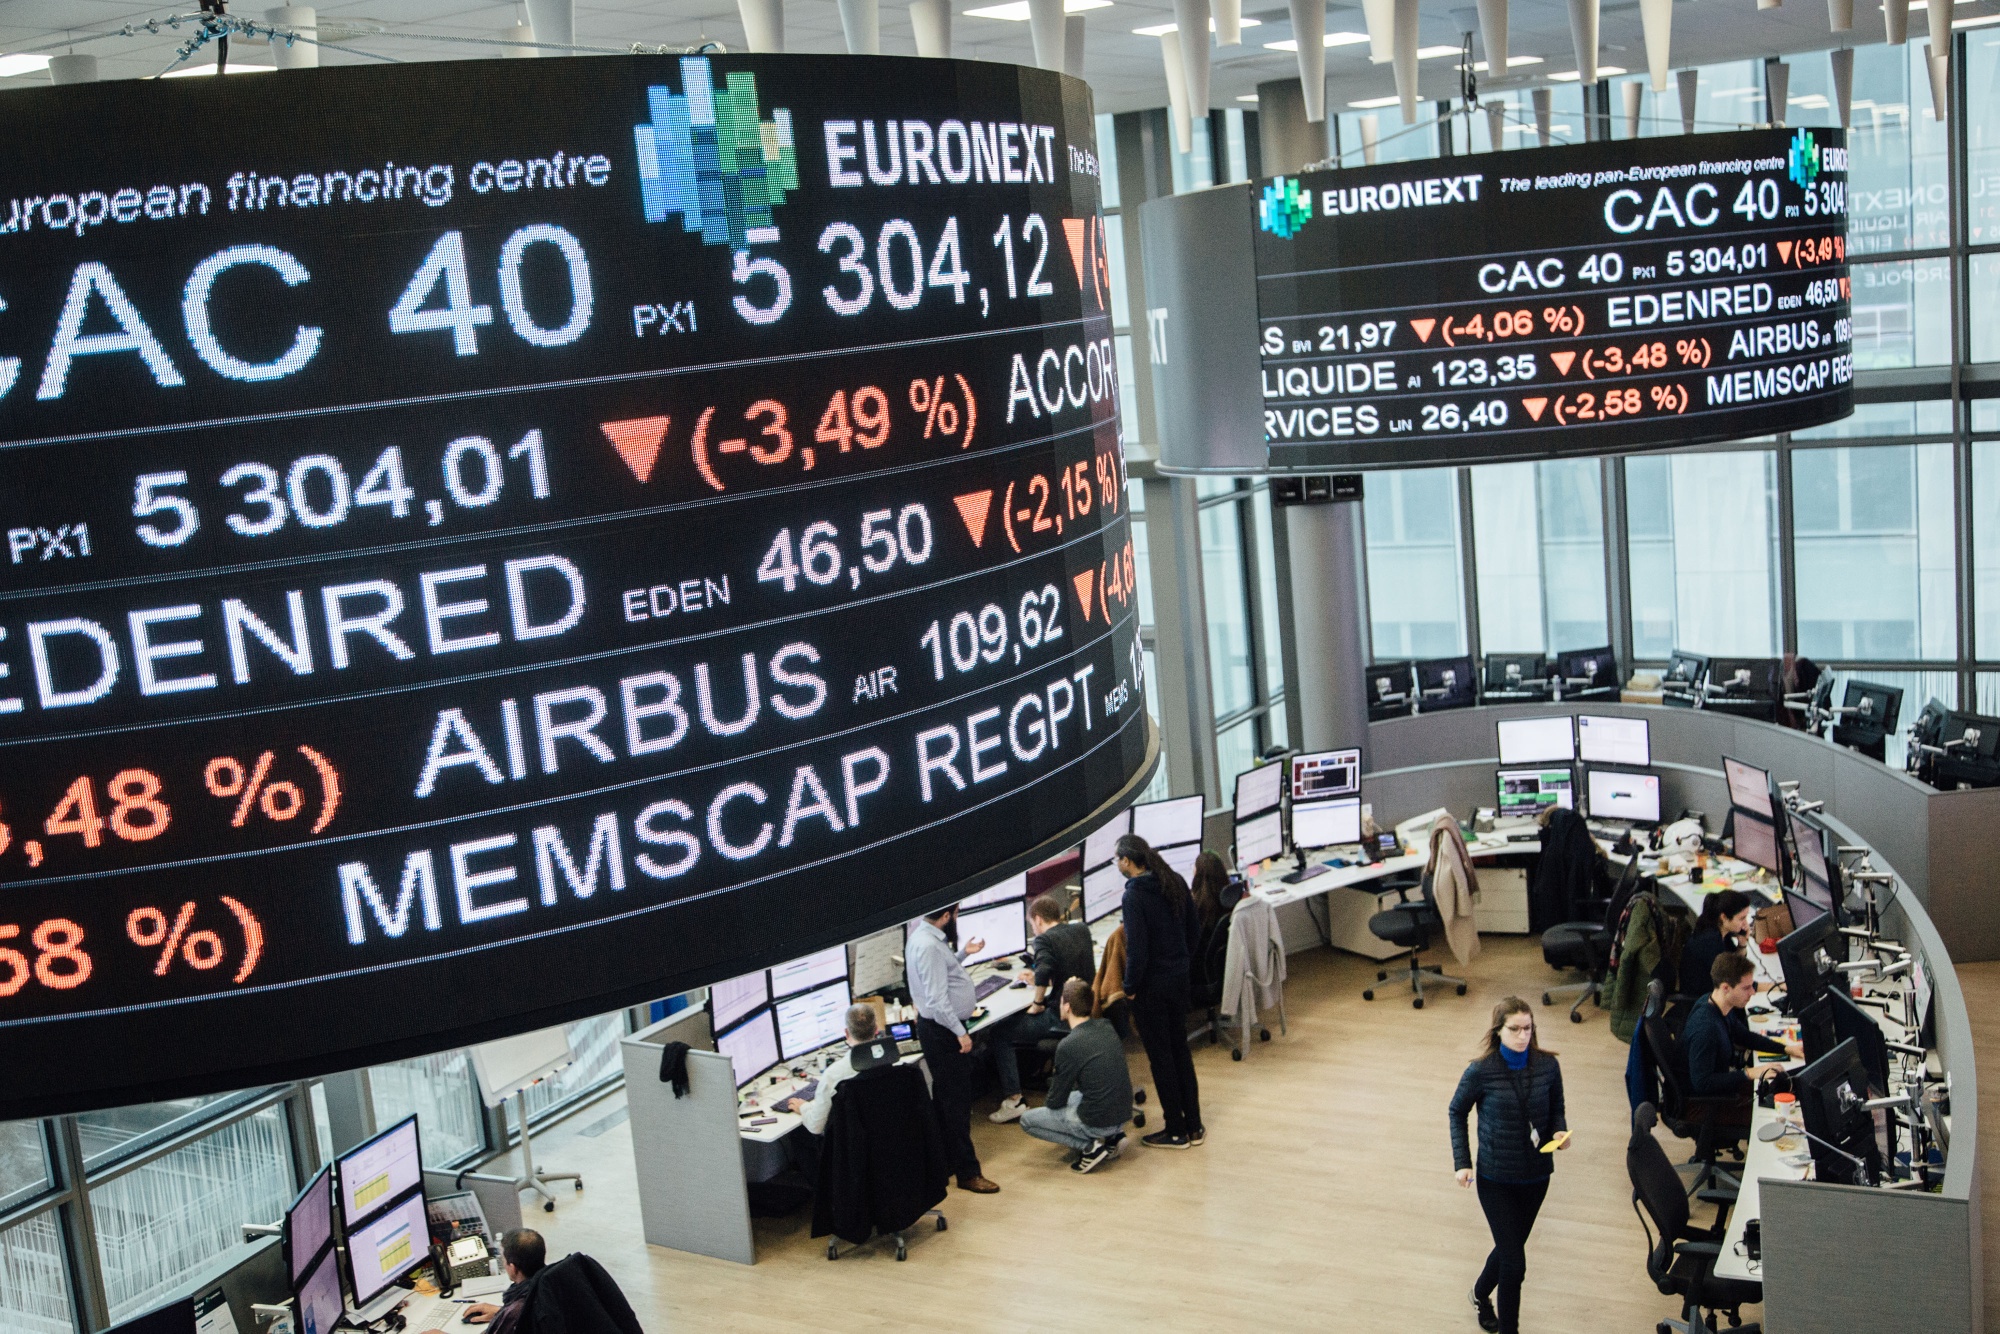 Company trading price movements are displayed on digital screens hanging inside the Euronext NV Paris stock exchange.